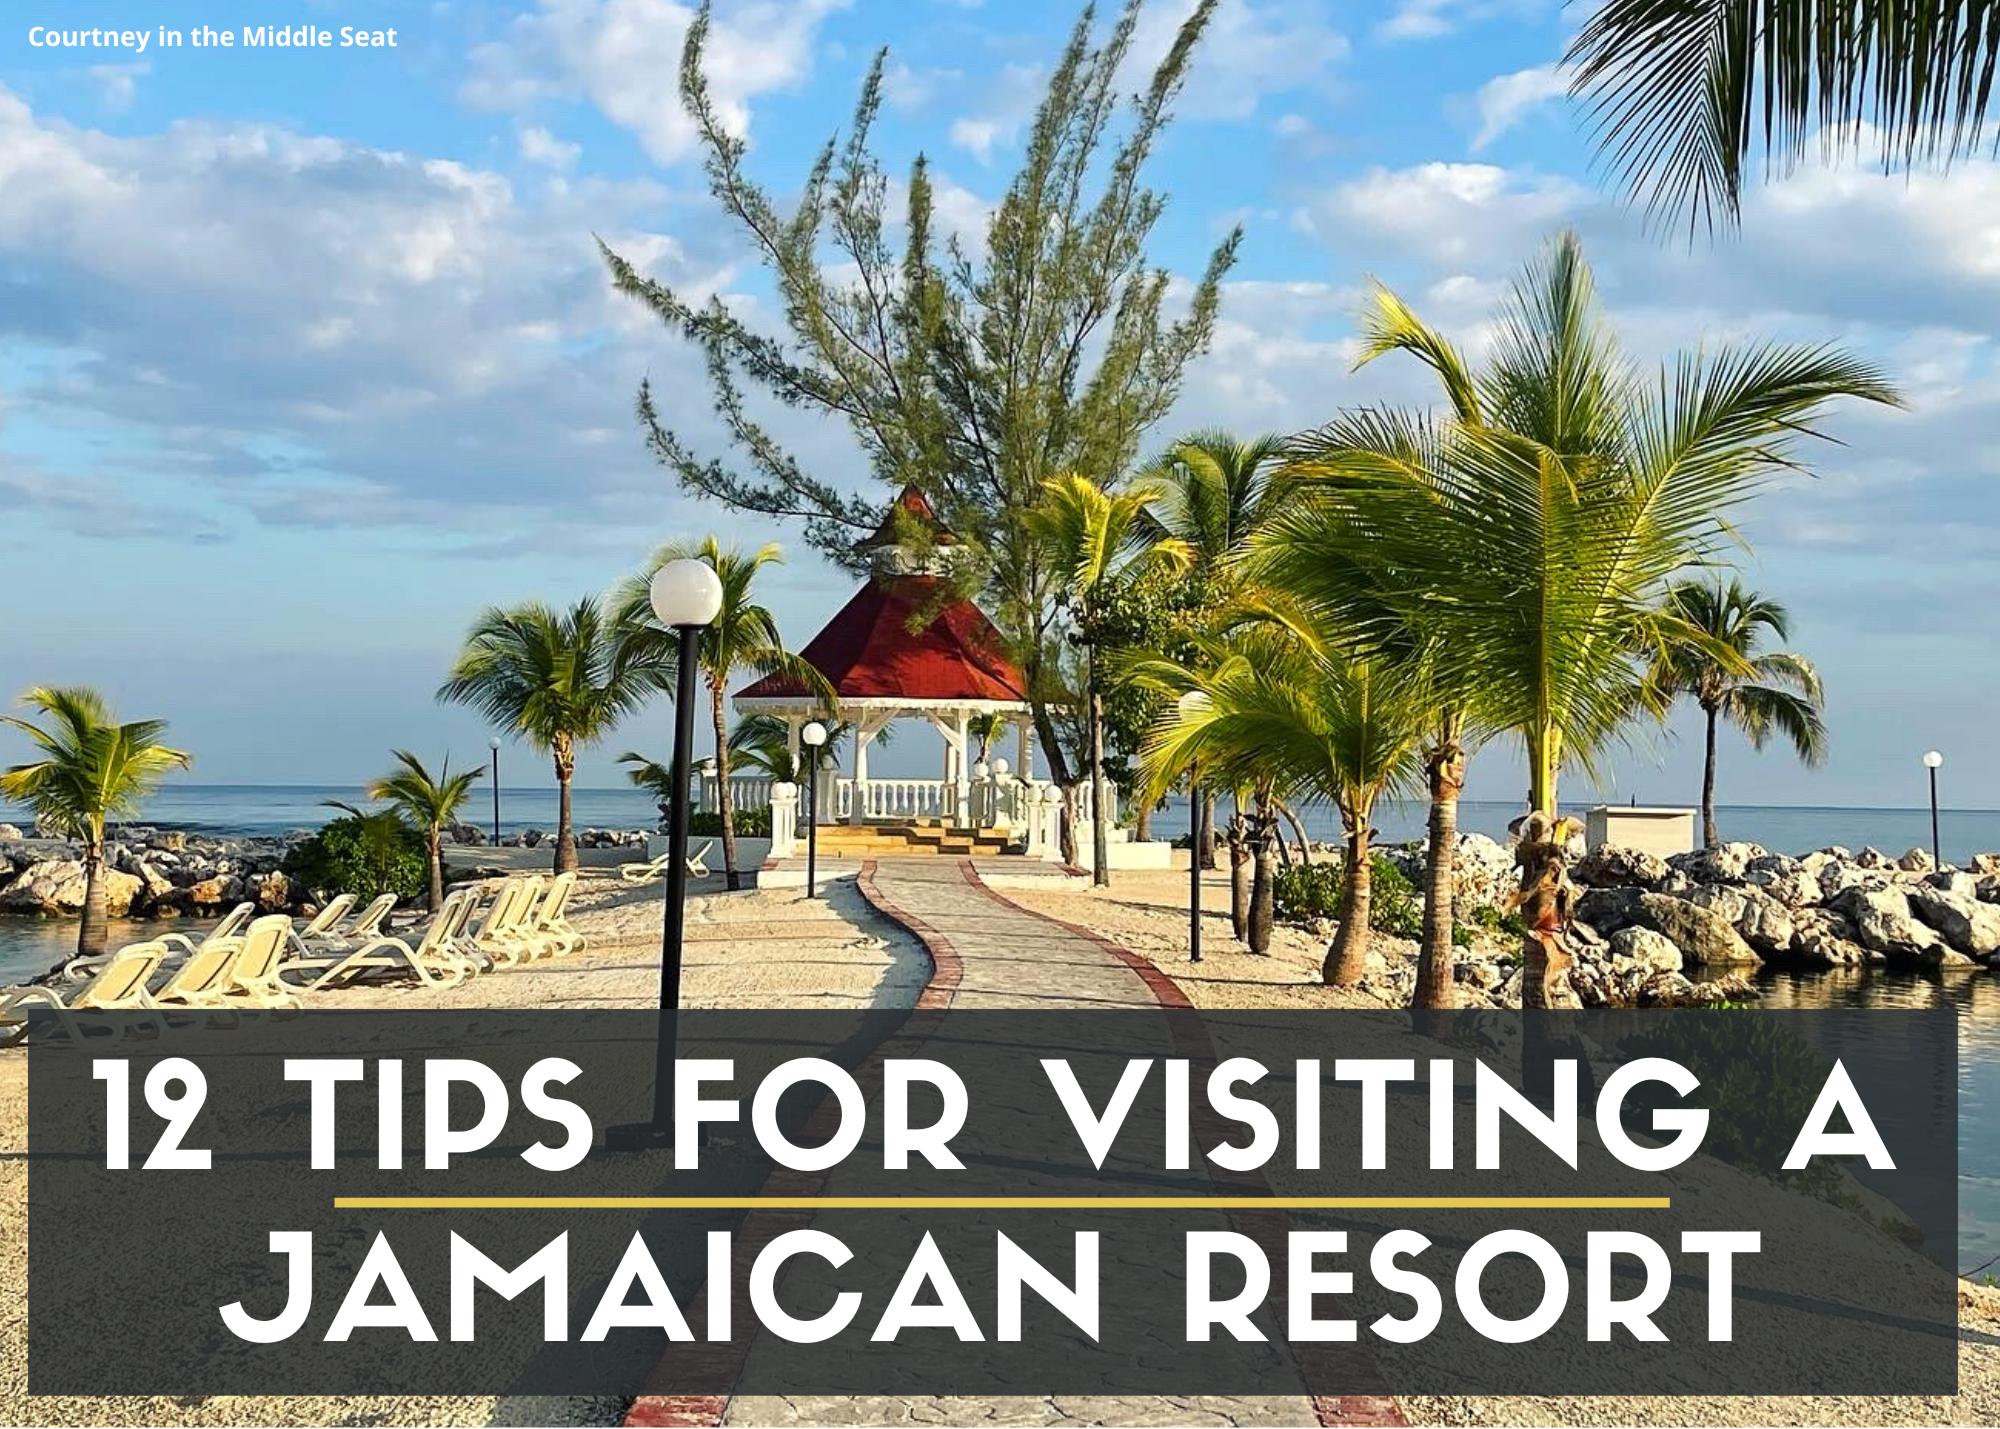 Cover photo of a beach with palm trees and a gazebo for a blog post about 12 Tips for Visiting a Jamaican Resort